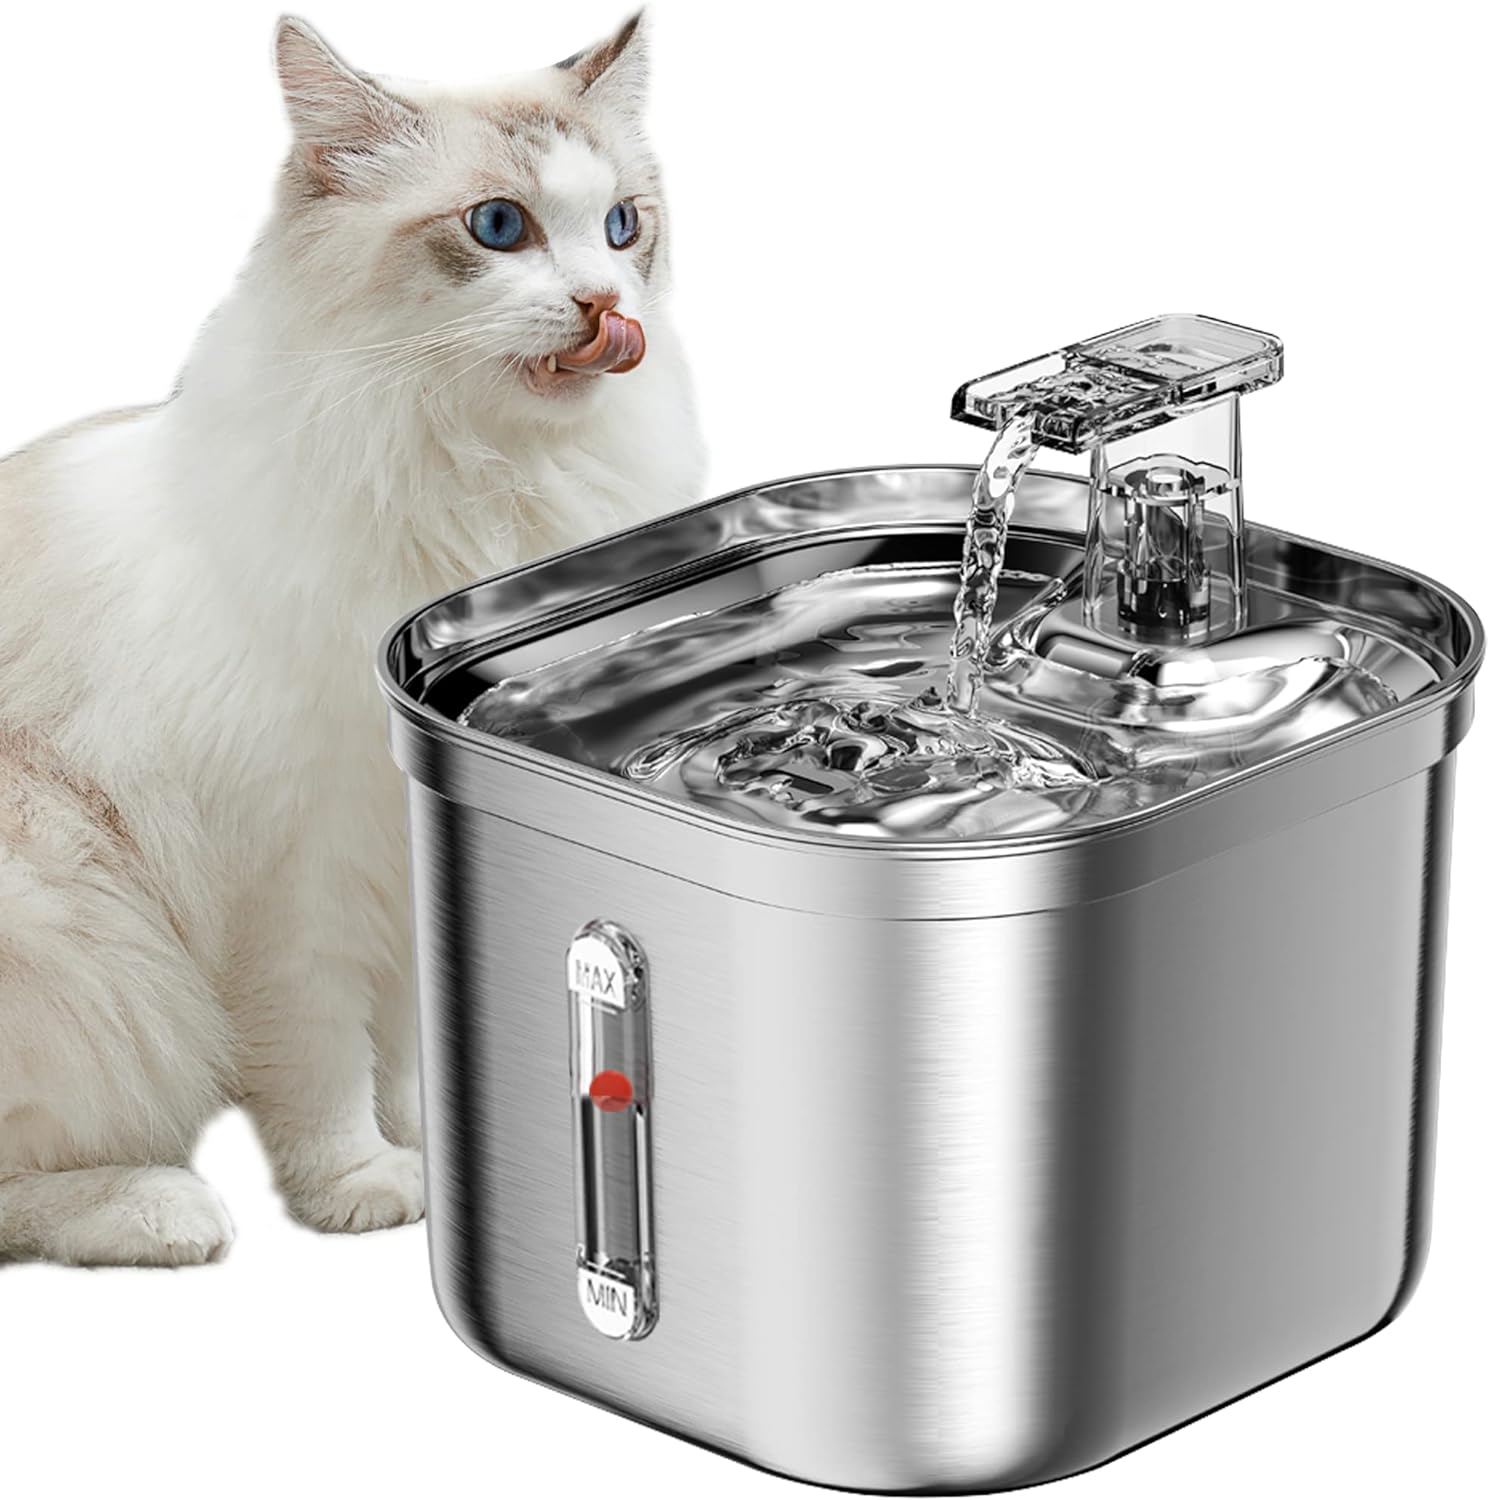 Exclusive Promotion: Homtyler Stainless Steel Multiple Pets Water Fountain for Cats Inside - Up to % Off!